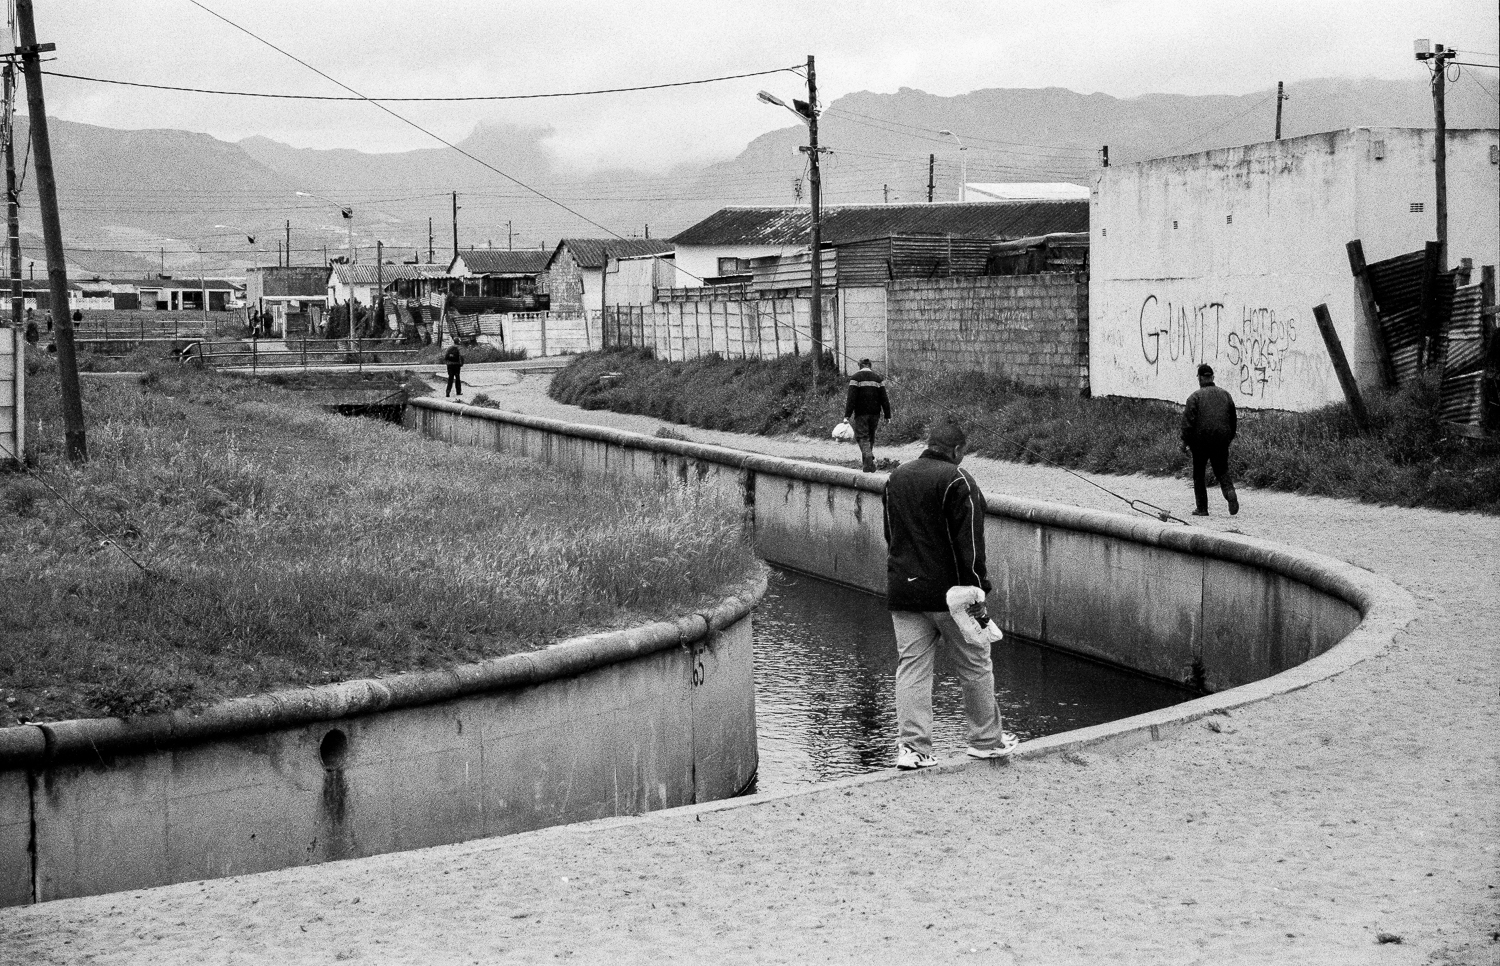 Men walking home after work, Steenberg in Cape Town, 2014.